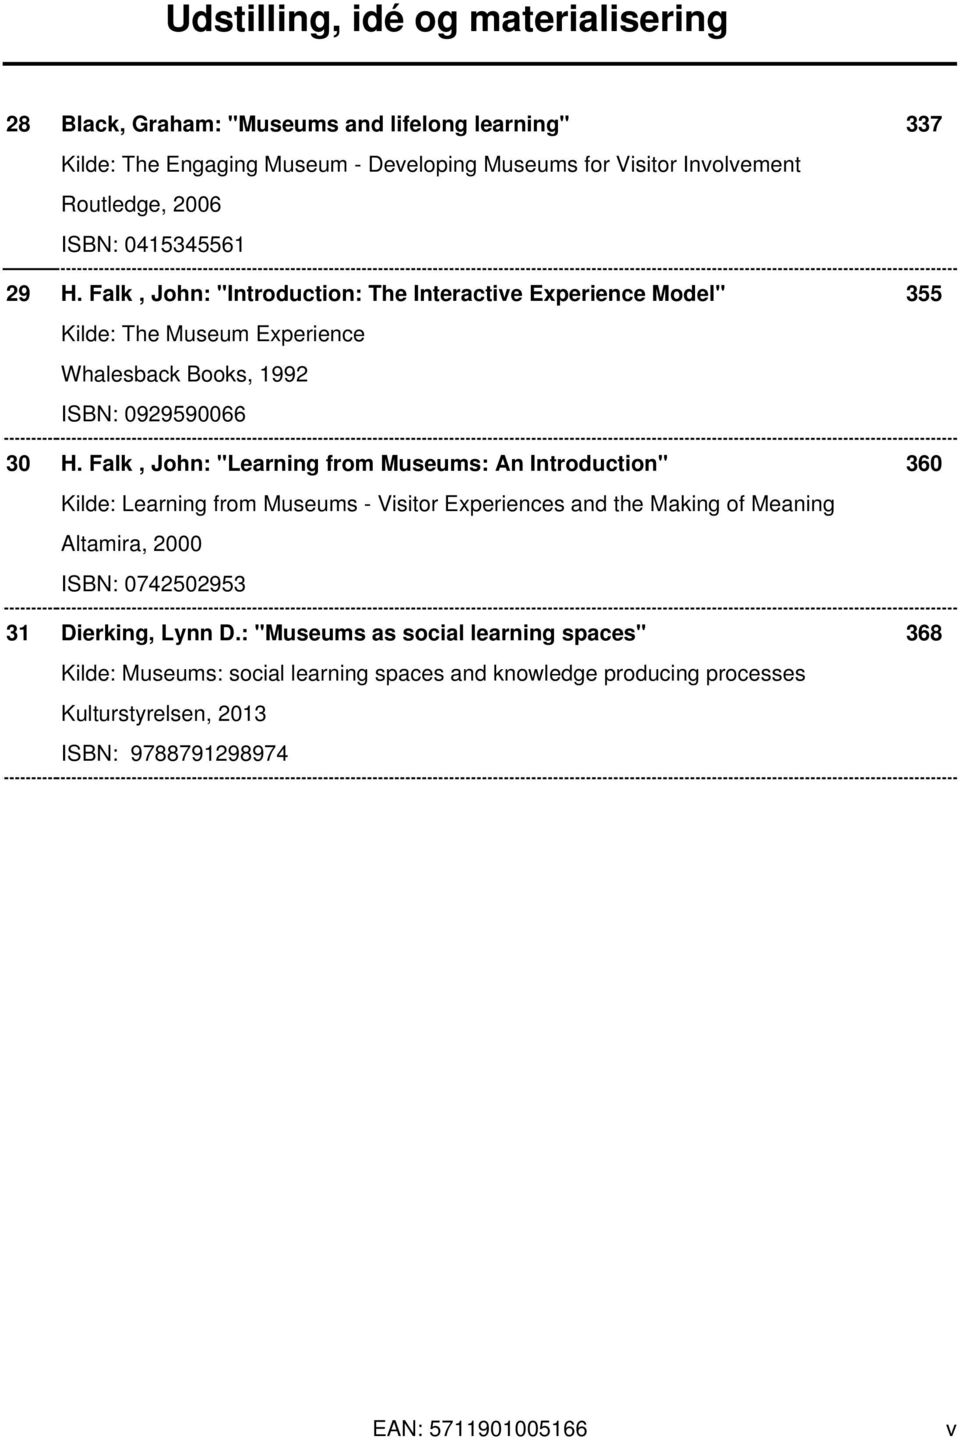 Falk, John: "Learning from Museums: An Introduction" 360 Kilde: Learning from Museums - Visitor Experiences and the Making of Meaning Altamira, 2000 ISBN: